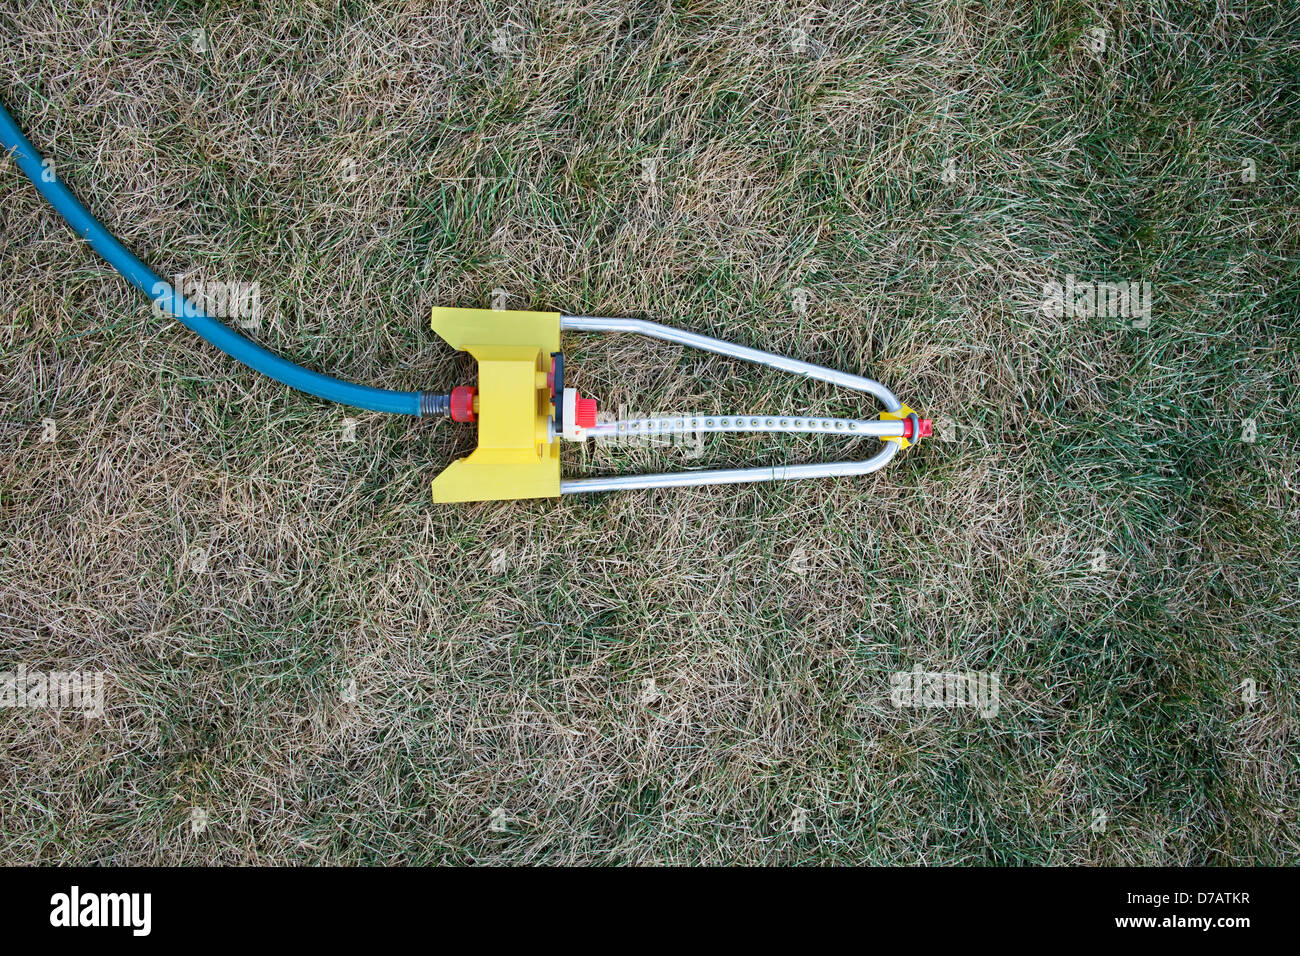 Lawn Sprinkler On Parched Grass; Brampton Ontario Canada Stock Photo